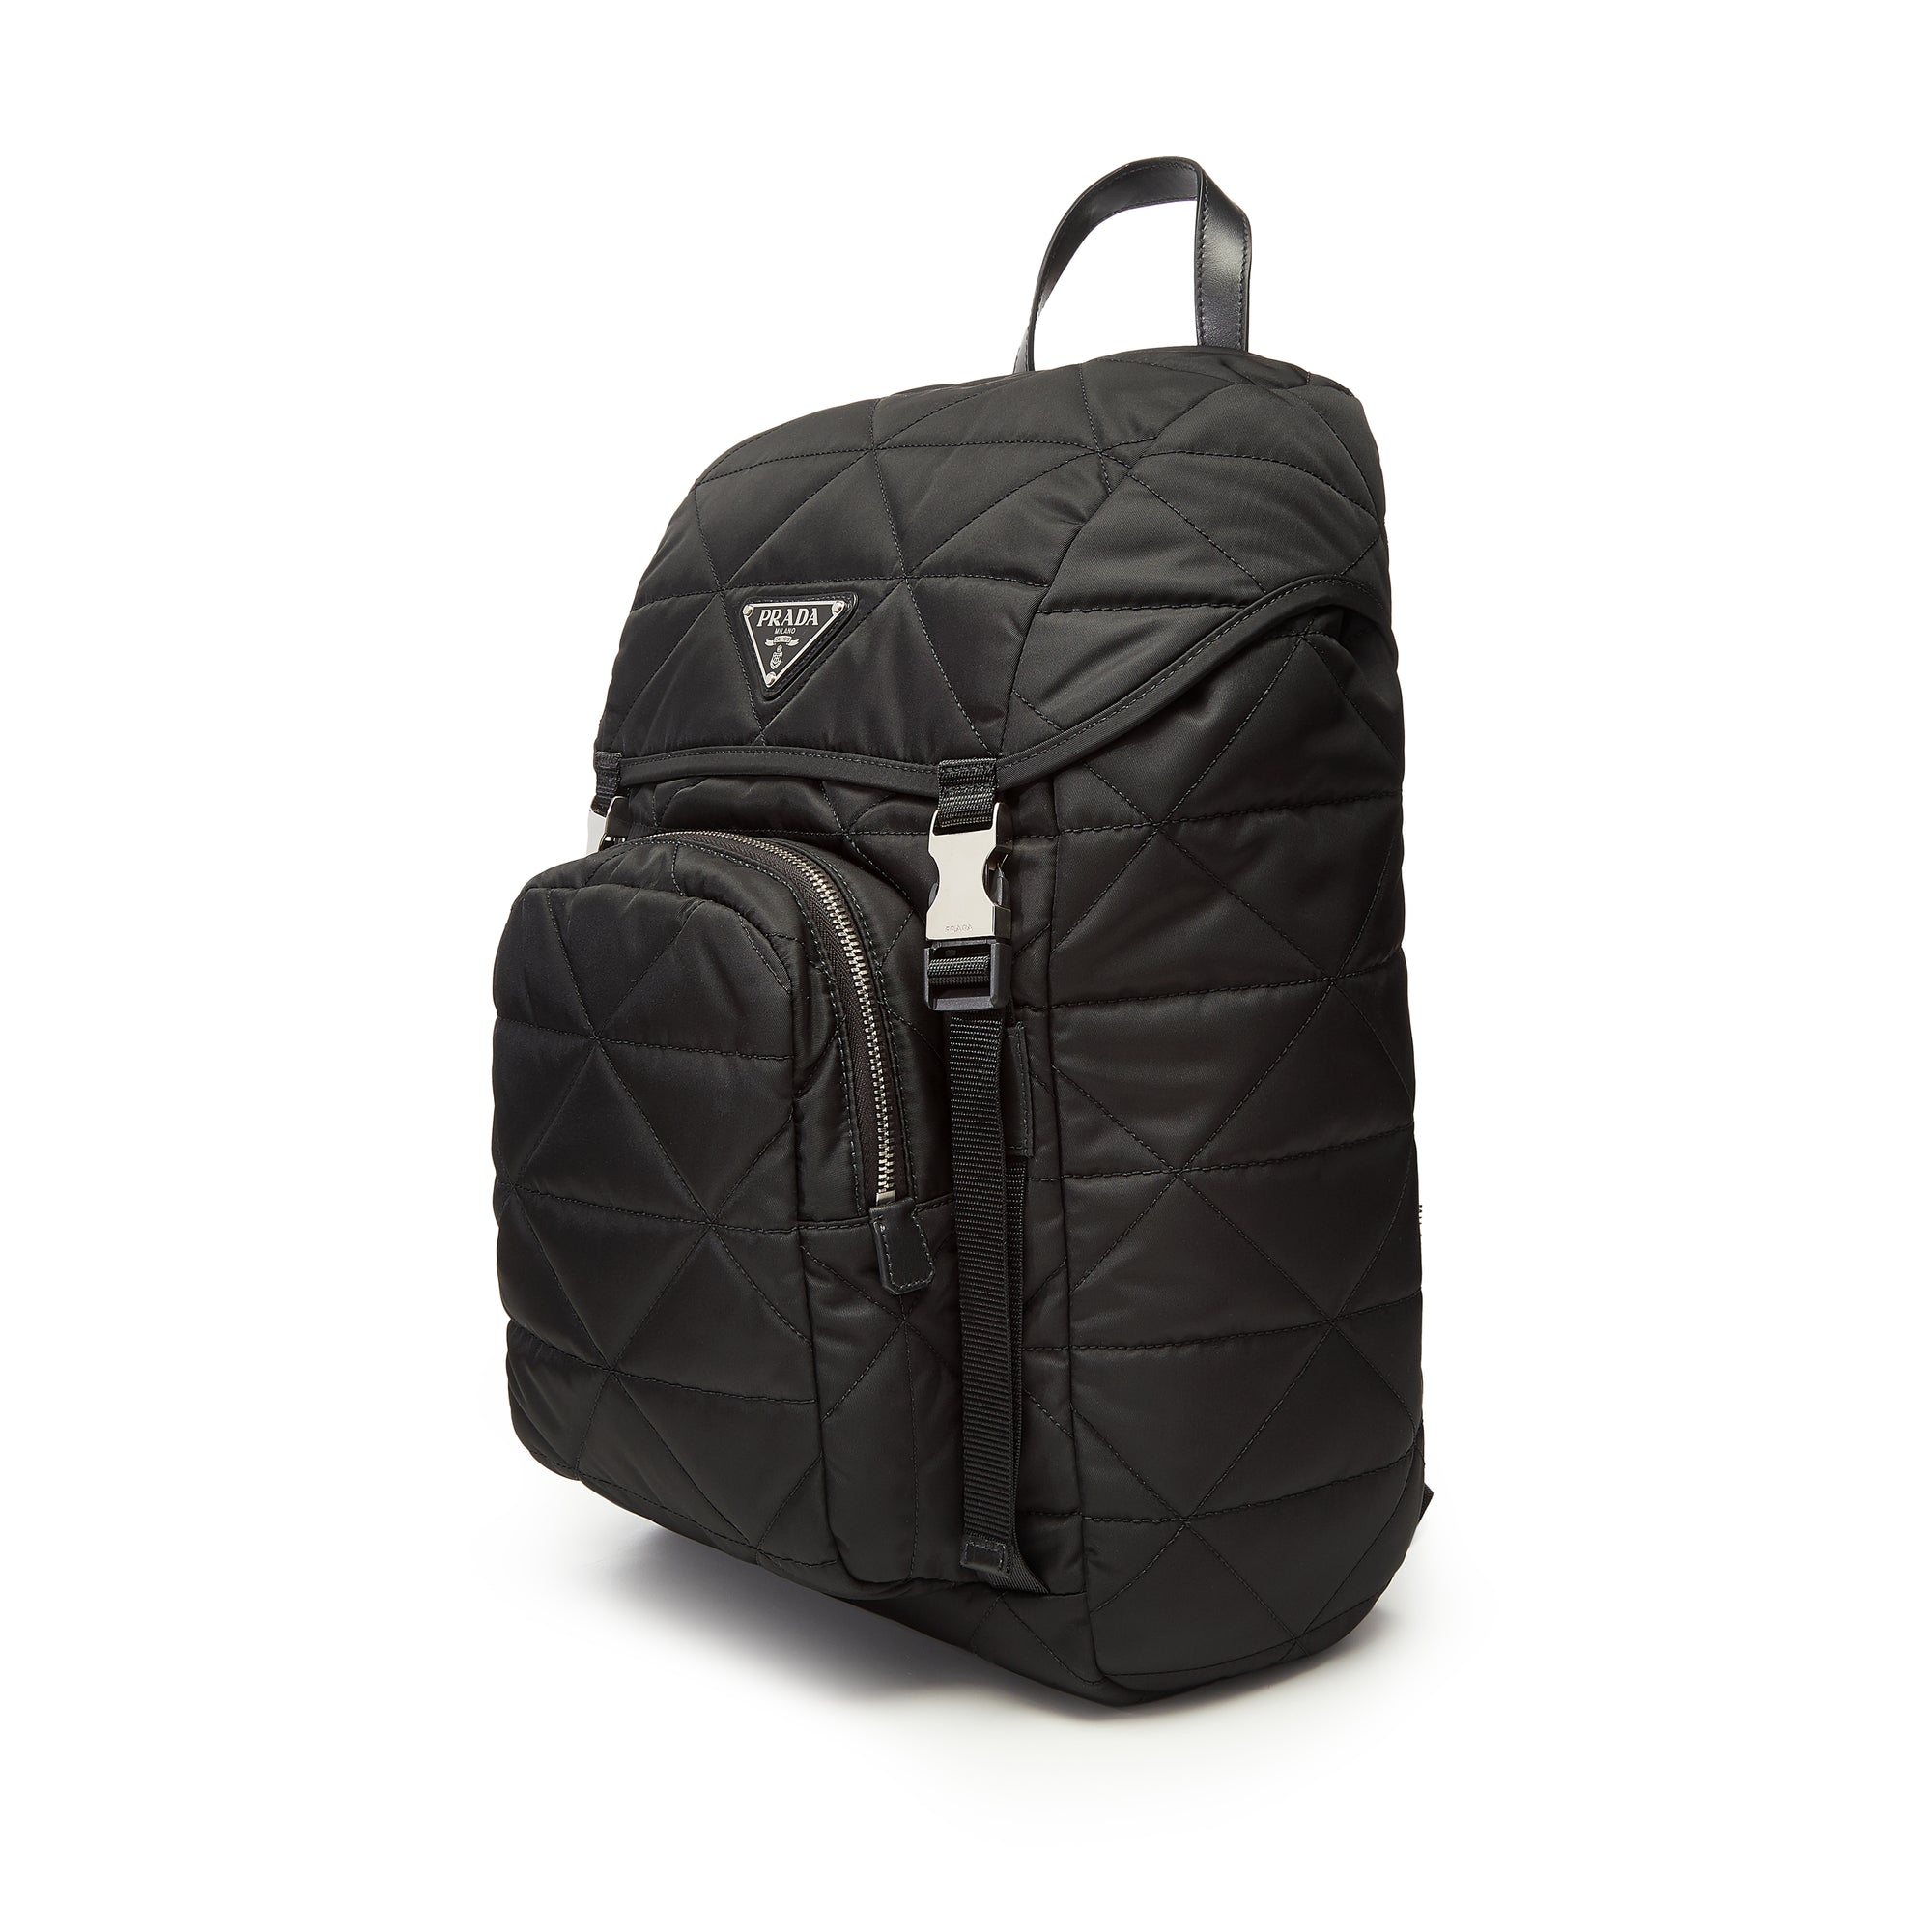 Prada - Men's Re-Nylon and Saffiano Leather Backpack - (Black) view 2